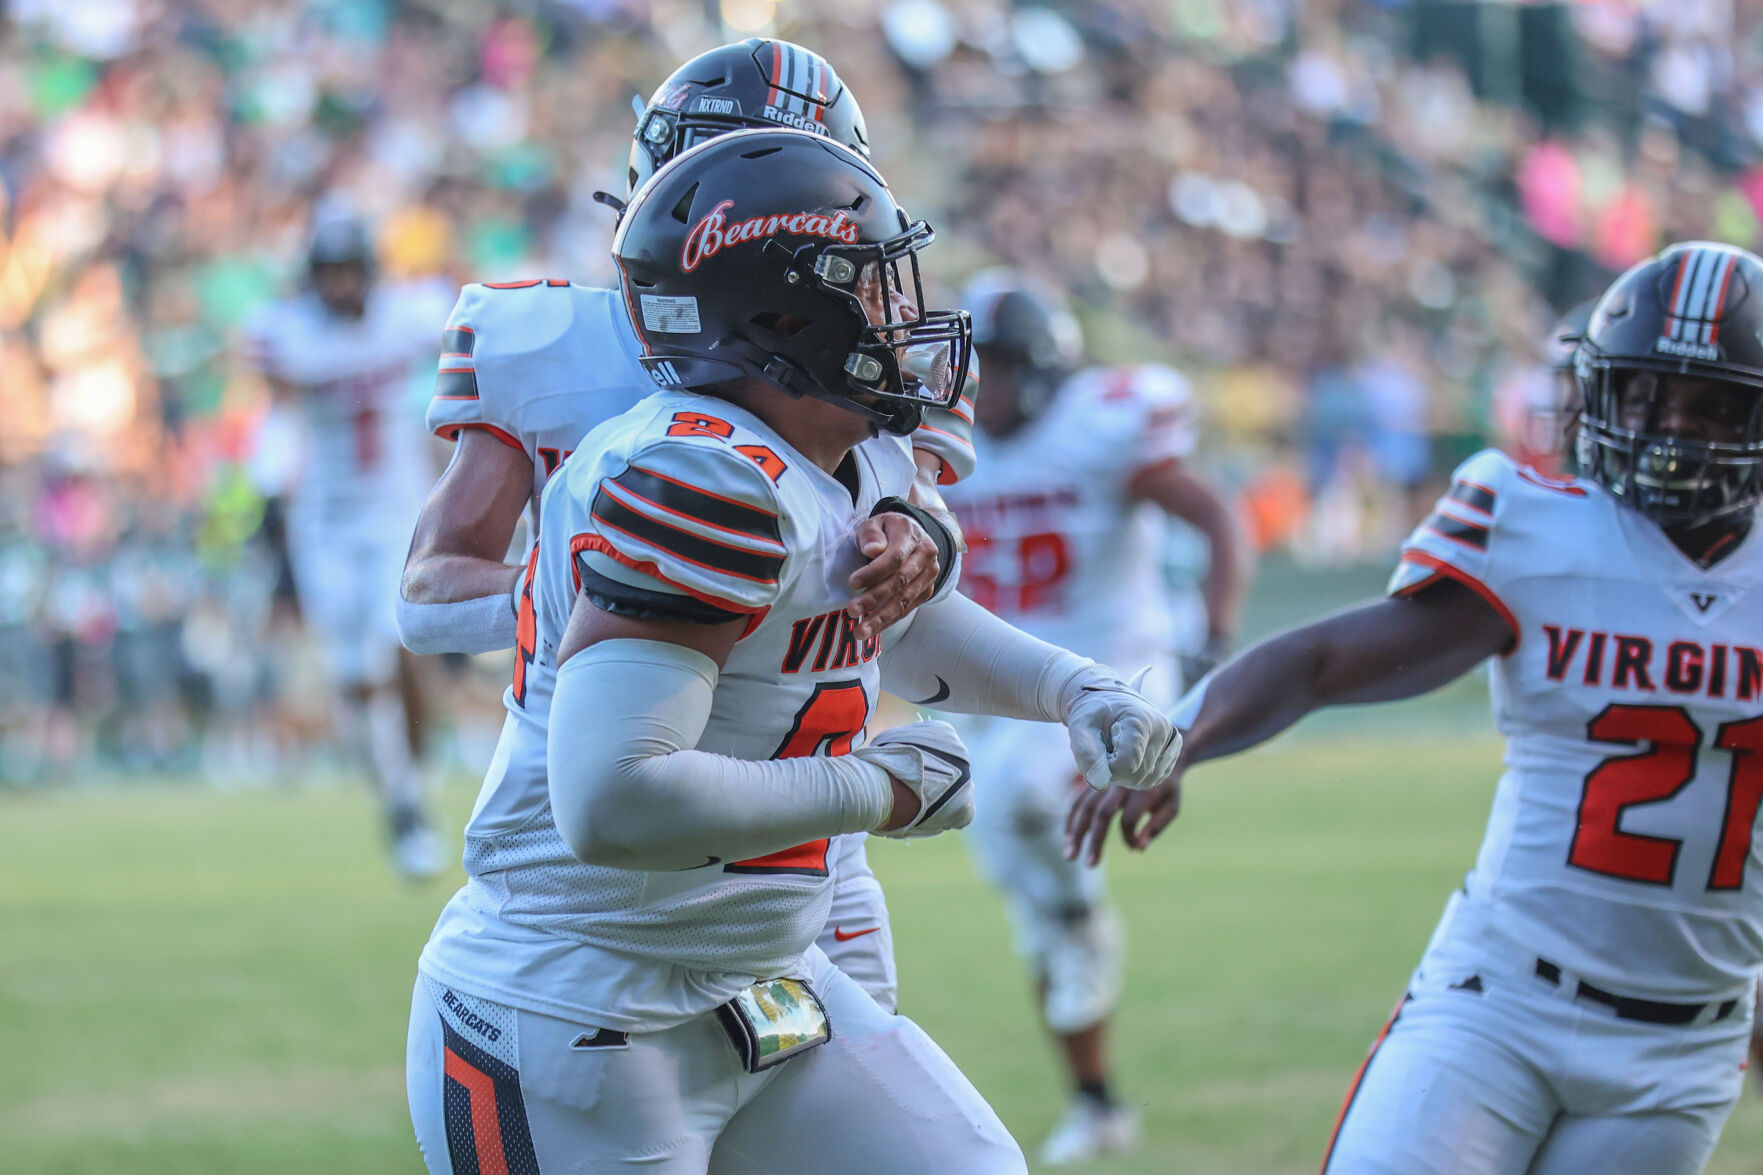 Alijah Burks leads Virginia High to a 13-6 victory over John Battle